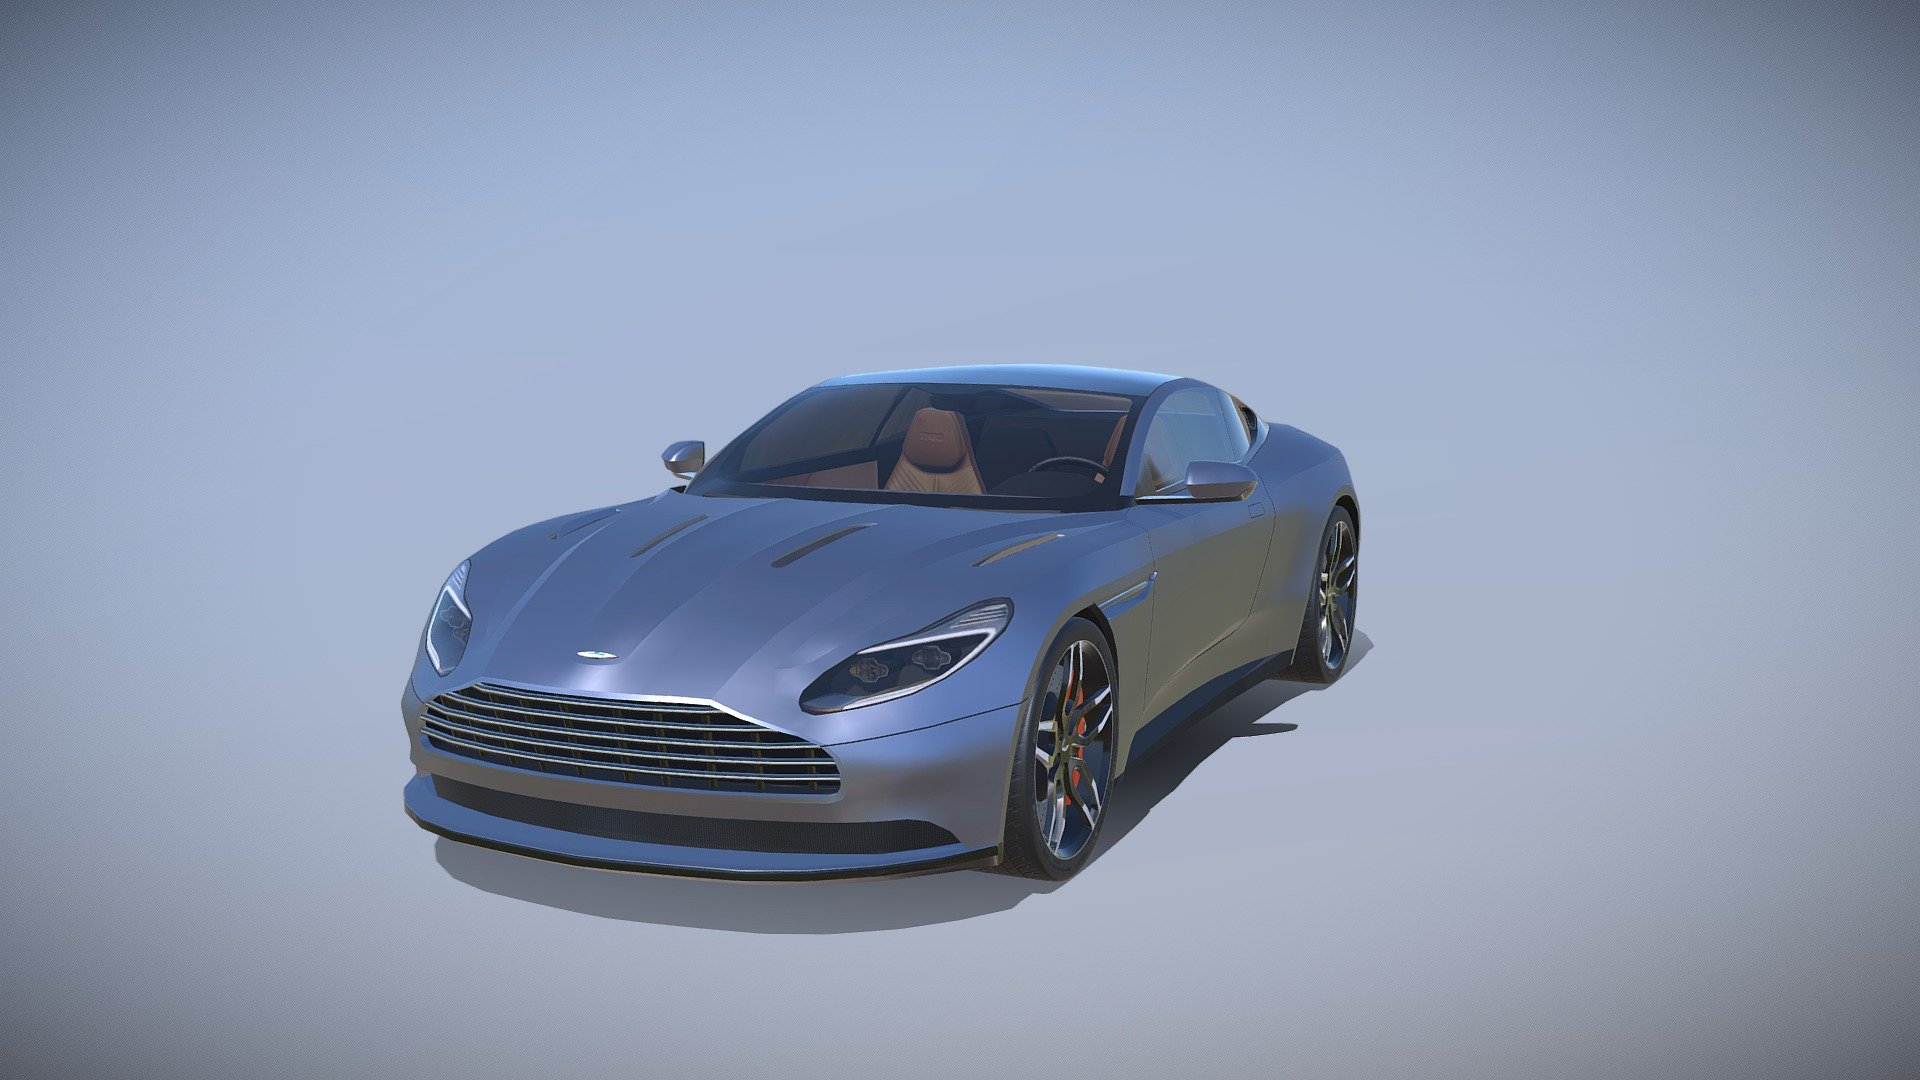 This is low-poly model of Aston Martin DB11.
Even with a low number of polygons the level of detail remains high.
Blender 2.9 standard materials.
Photo textures.



Real world scale.
Width: 2.060 mm
Lenght: 4.739 mm
Height: 1.279 mm

You can easily change main color of the vehicle.

Model also includes lowpoly interior. Interior is only for better outside visual detail.


All parts have the correct name.
For body - DB11.Body
For wheel - DB11.Wheel.Ft.L
Ft.L means front left wheel.
For brake caliper - DB11.WheelBrake.Ft.L

With naming like that it will be easier to rigge, animate the model.


Vertices: 17,846
Edges: 34,650
Faces: 16,786
Triangles: 33,032

If you want to buy this model or my other models, you can find them on other platforms where my name is: PieEntertainment. Or just write here in the comments.

HDR not included 3d model